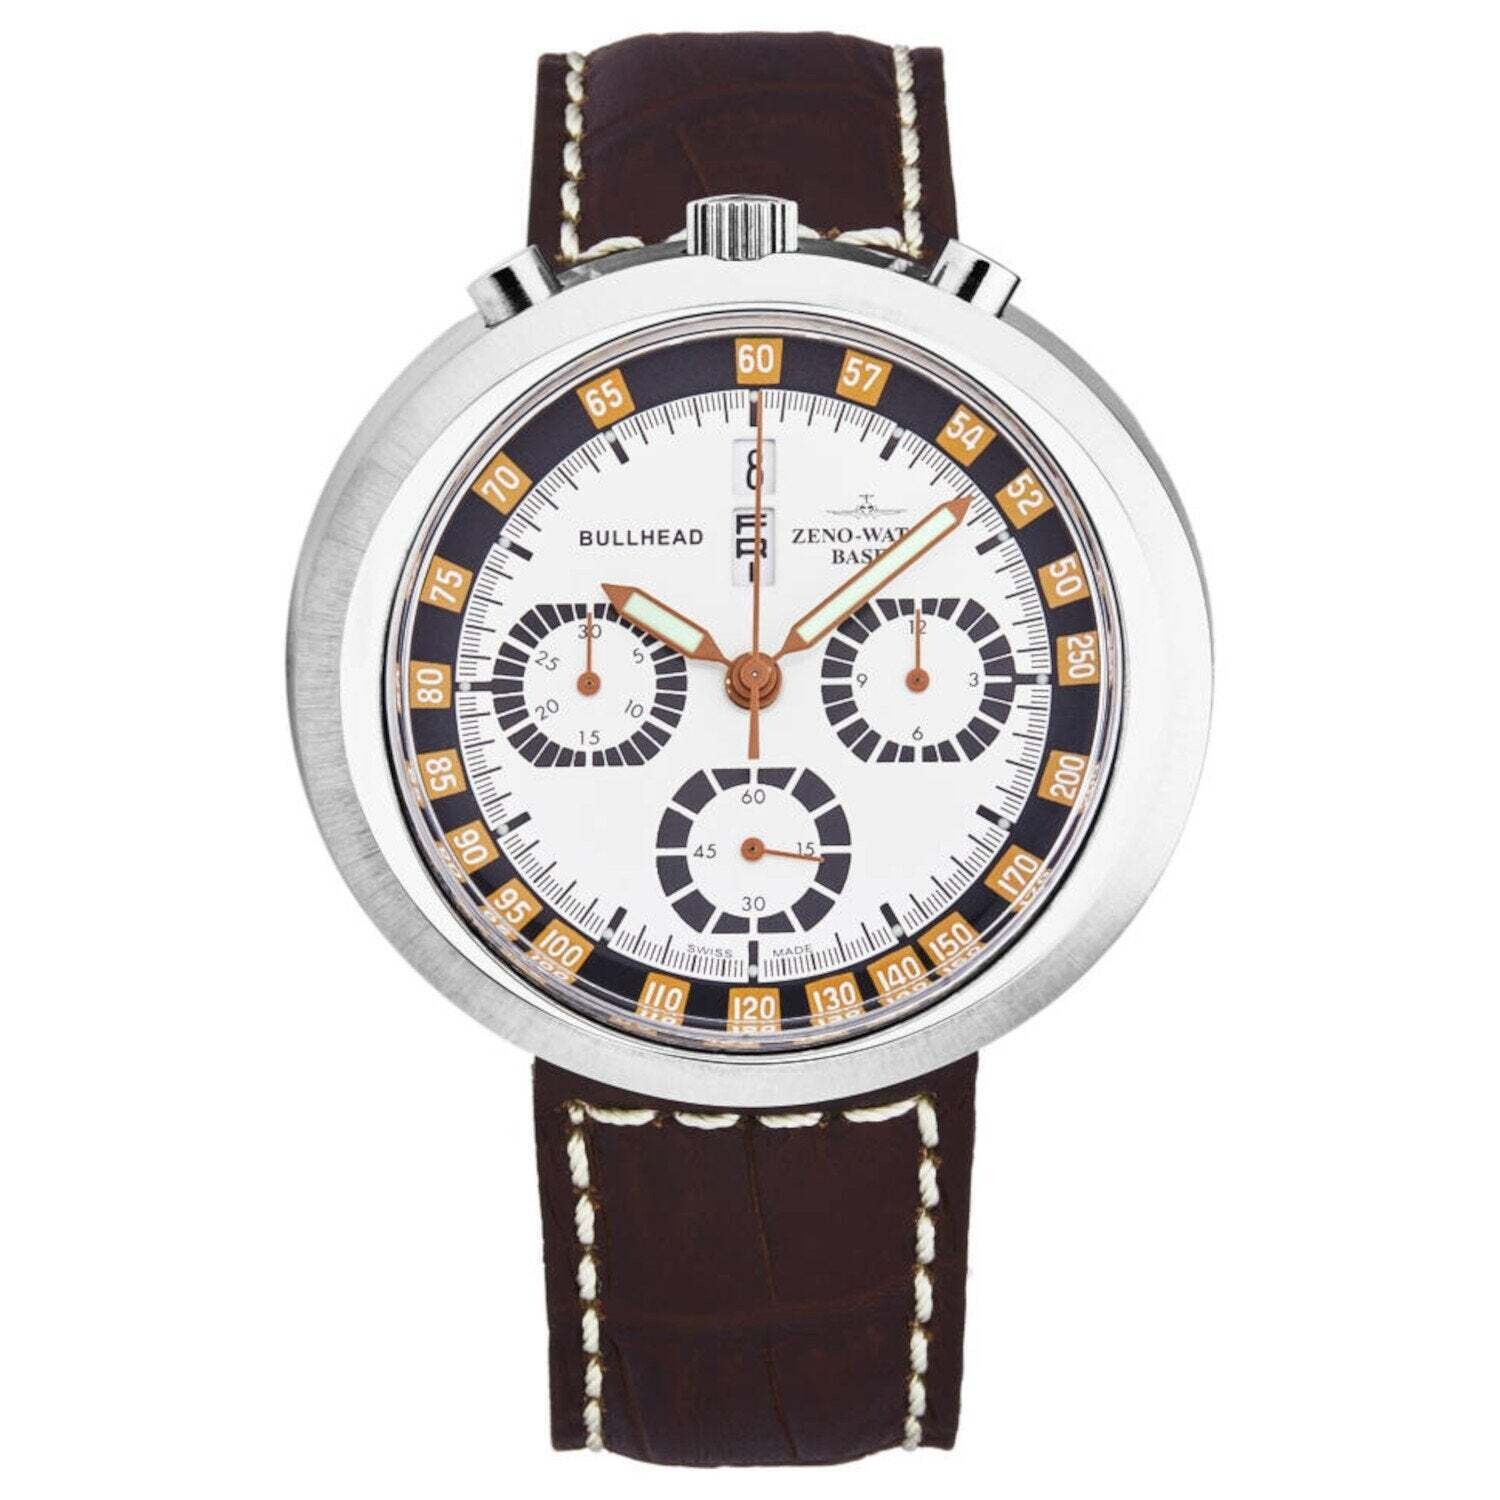 Zeno 3591-I26 Men's 'Bullhead' Chronograph Limited Edition White Dial Brown Leather Strap Automatic Watch